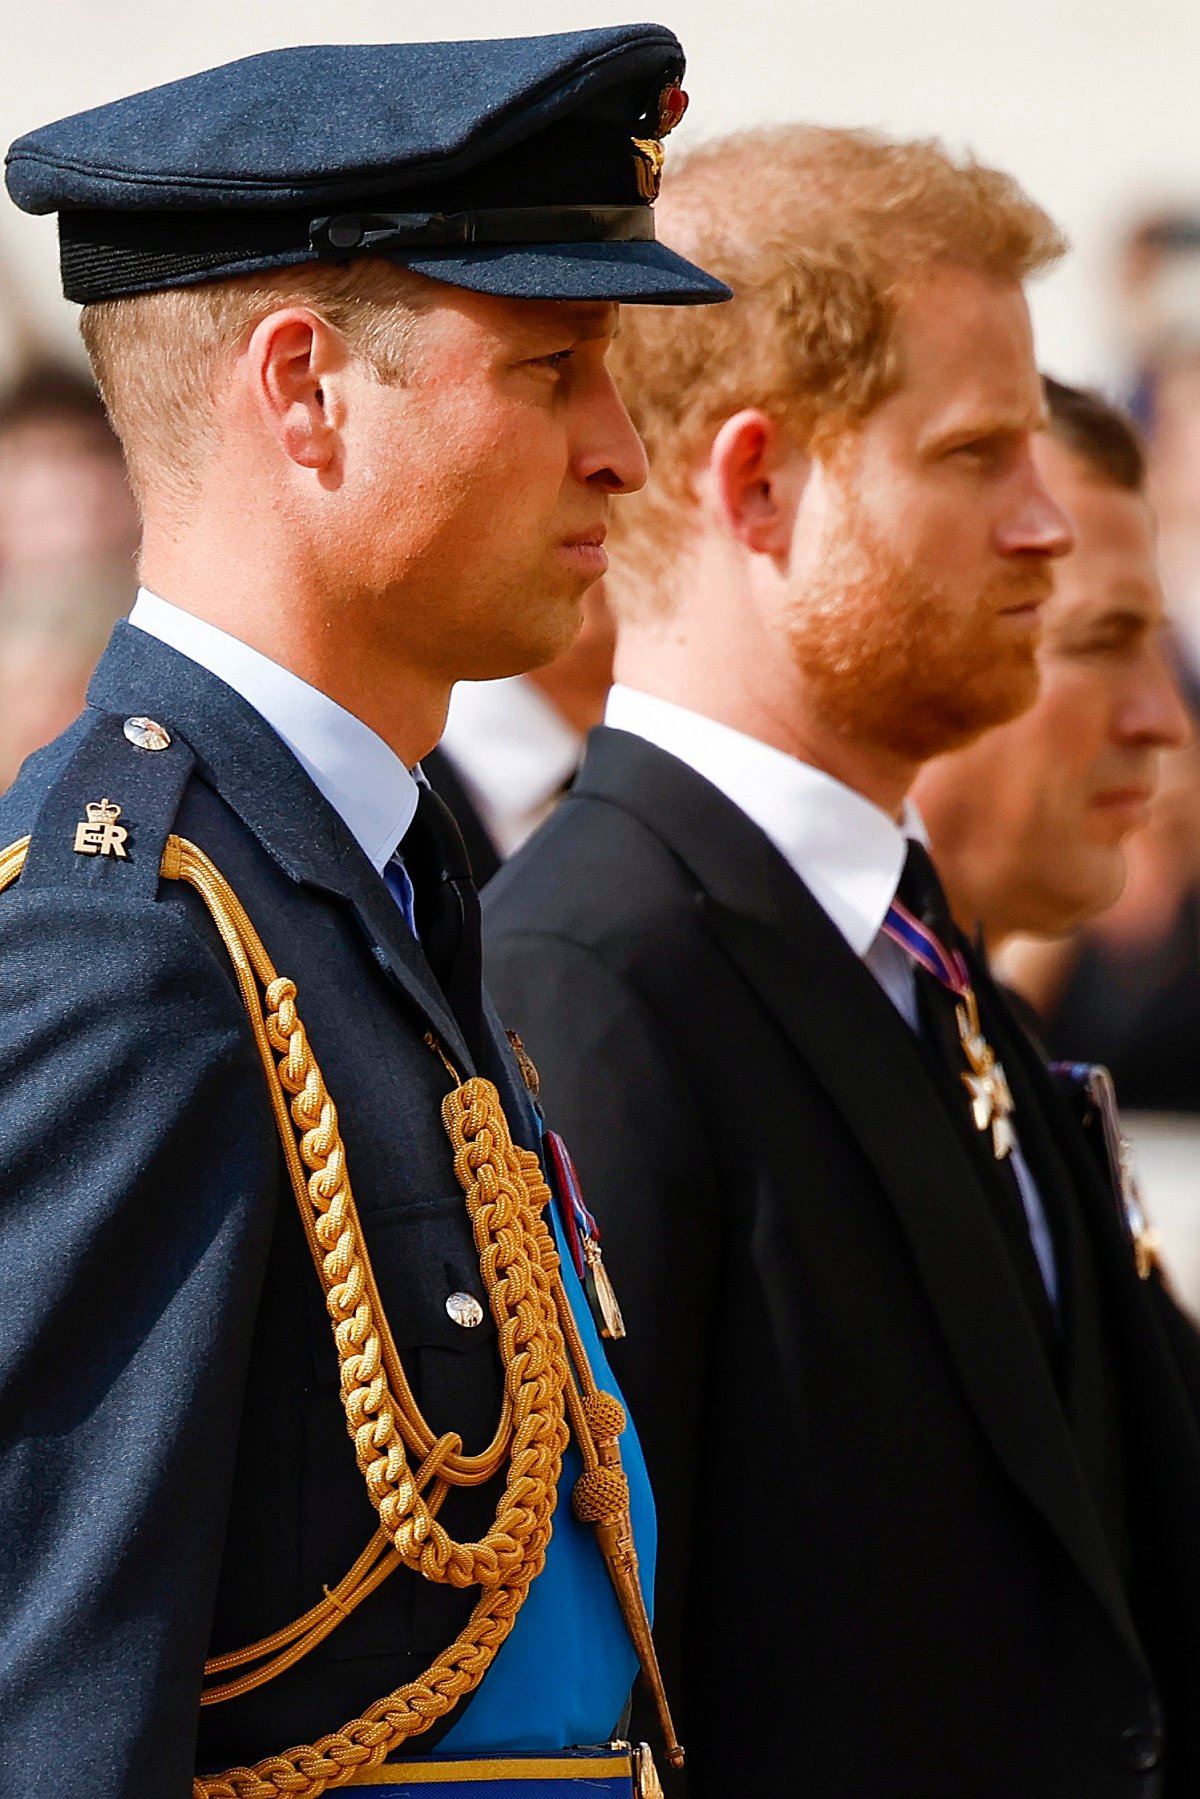 Prince William and Prince Harry walk behind Queen Elizabeth II coffin during the procession for the lying-in-state